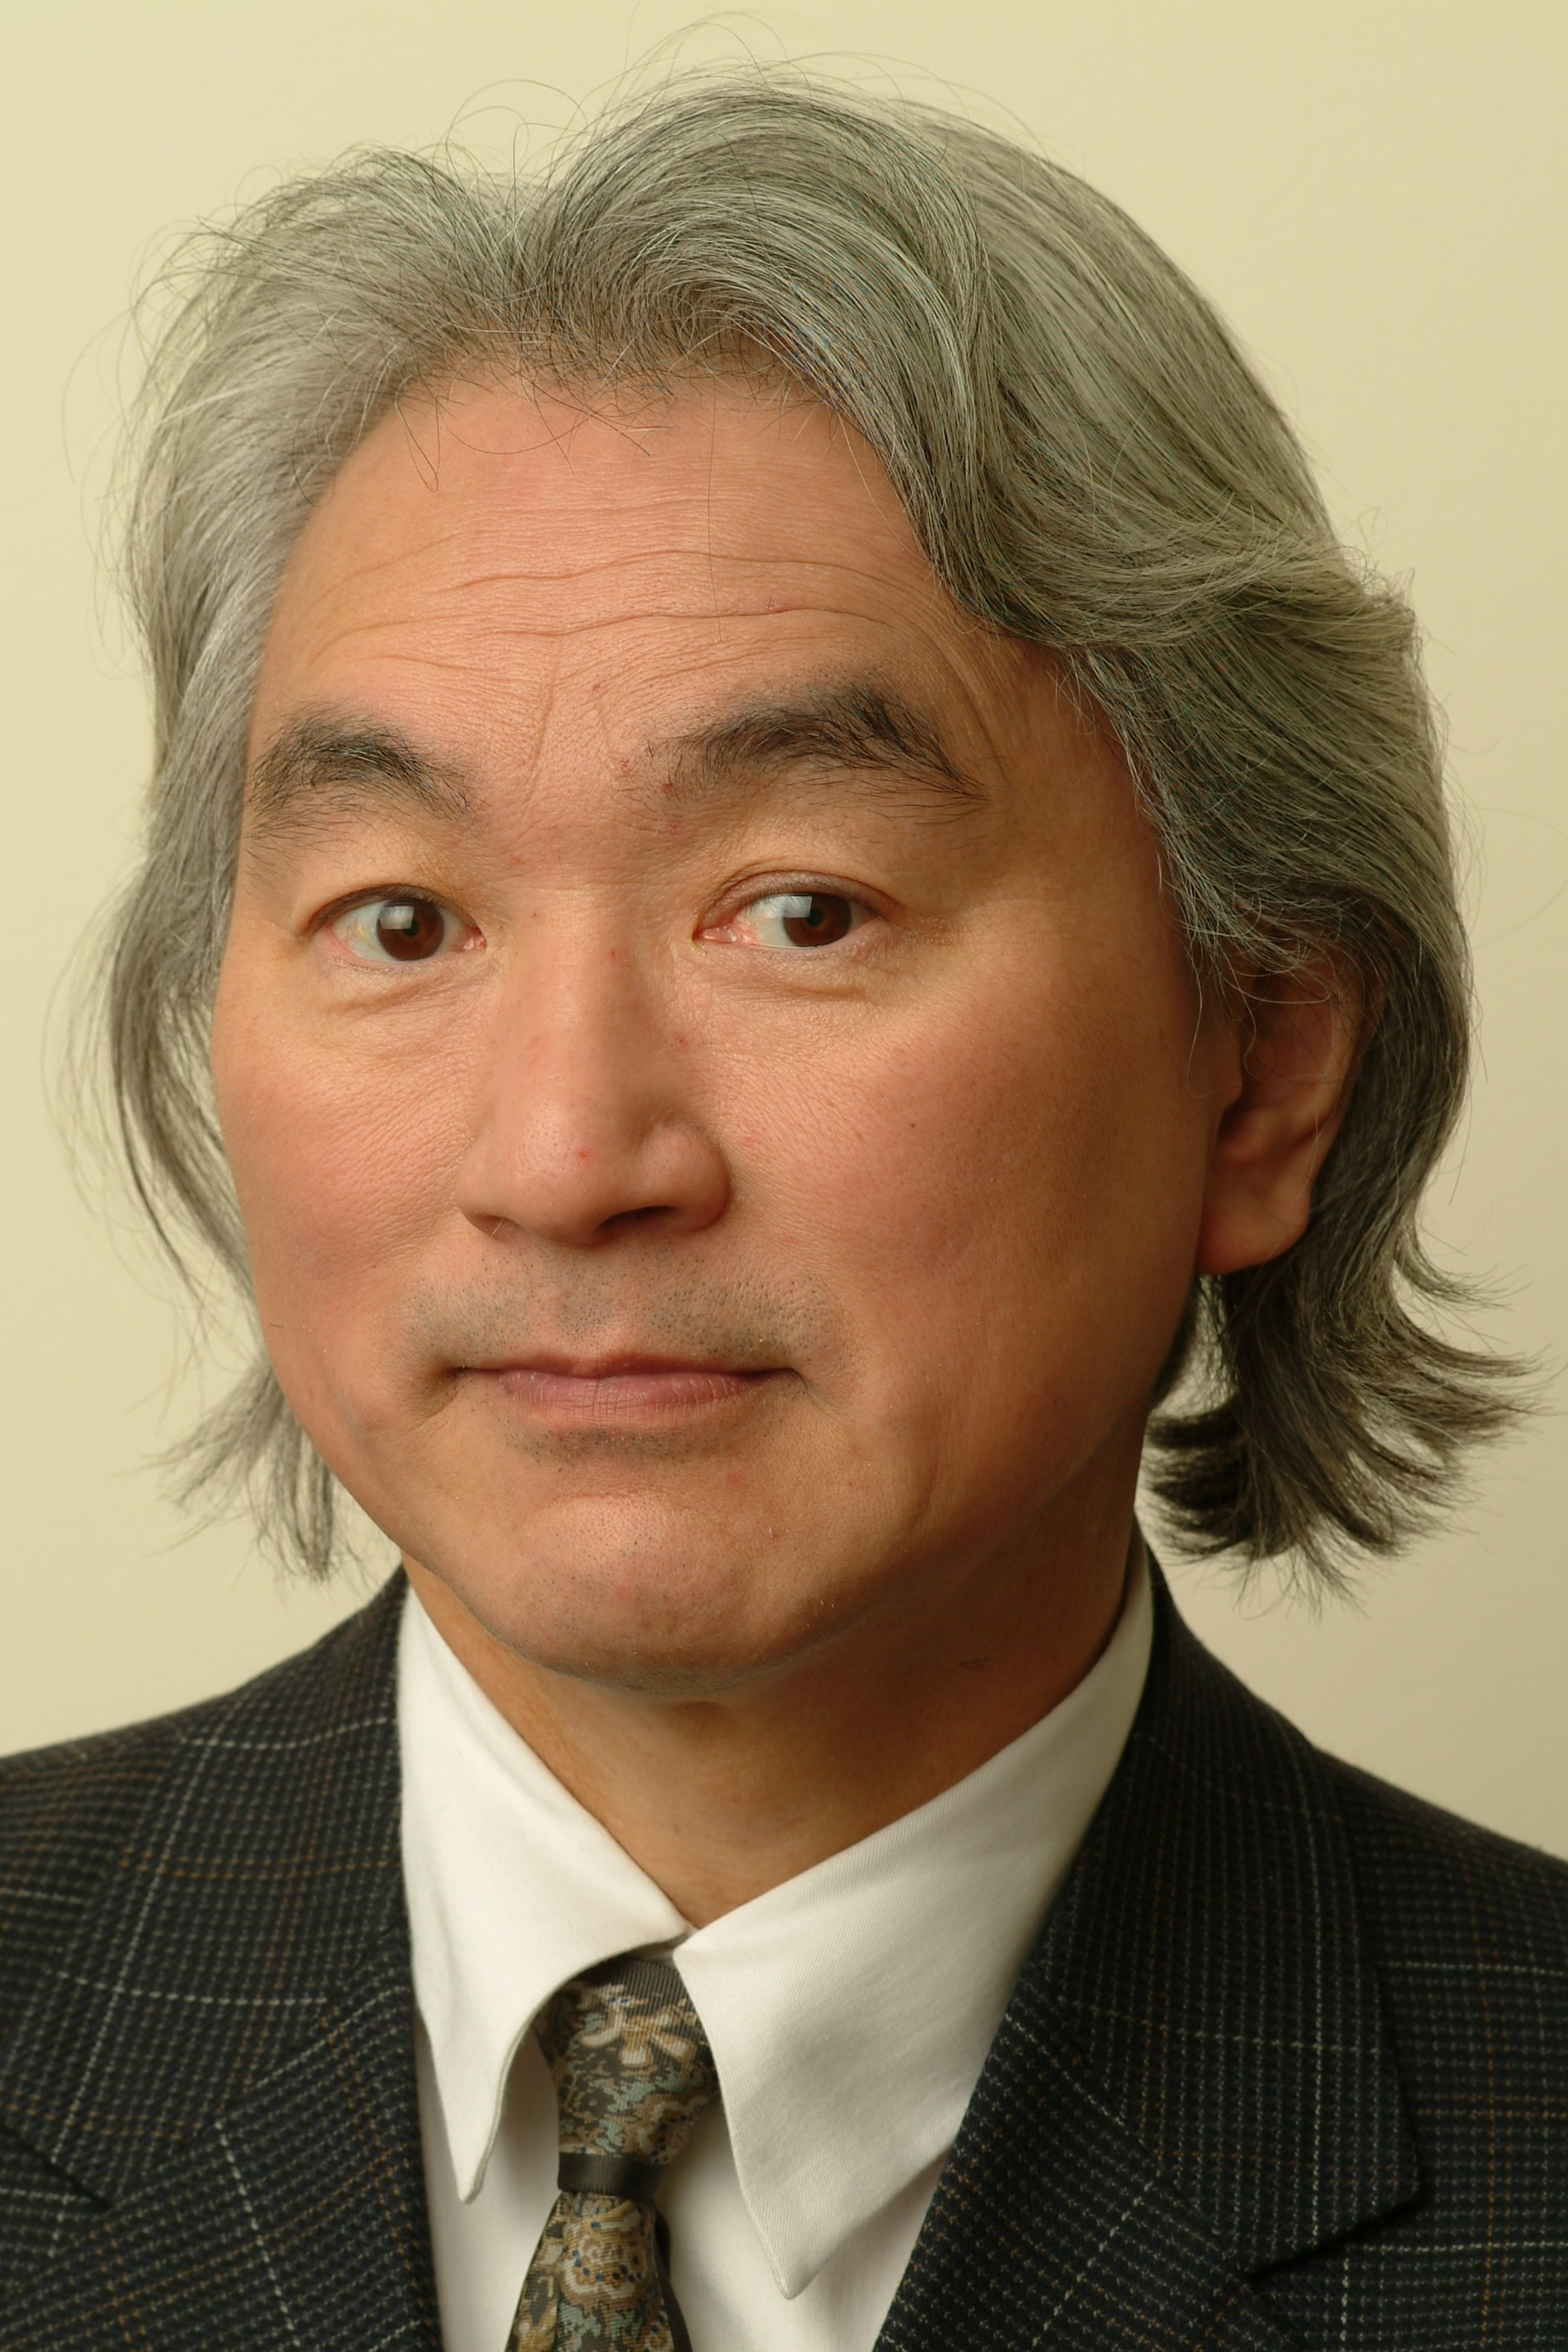 Internationally renowned physicist Dr. Michio Kaku will appear as part of the new NJCU President's Speaker Series on Tuesday, December 9 at 6:30 p.m., at the Liberty Science Center in Jersey City. Photo courtesy of the Washington Speakers Bureau.